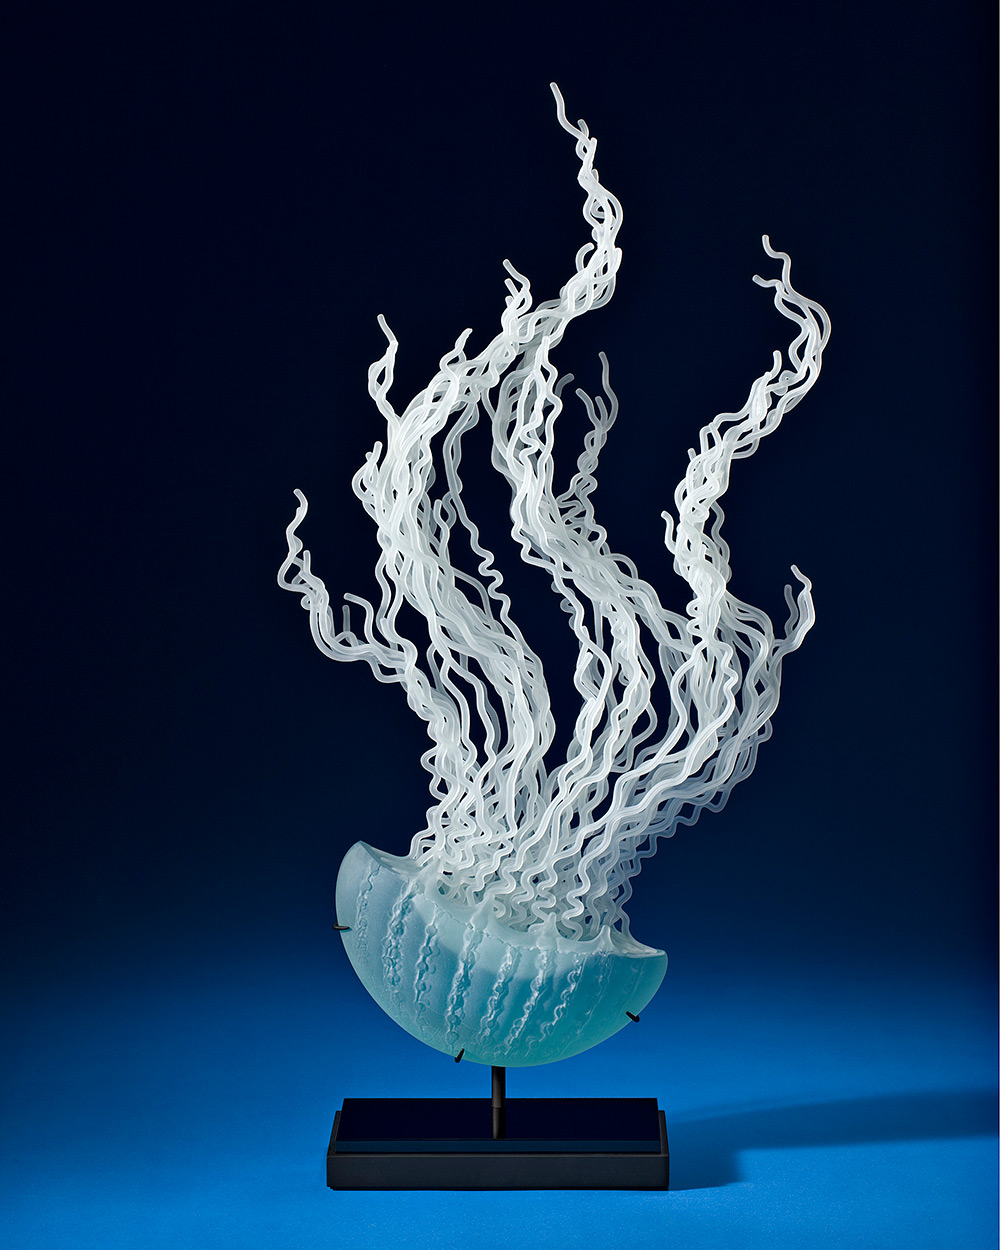 Sublime Glass Sculptures Inspired By Waves And Sea Creatures By K. William Lequier (8)